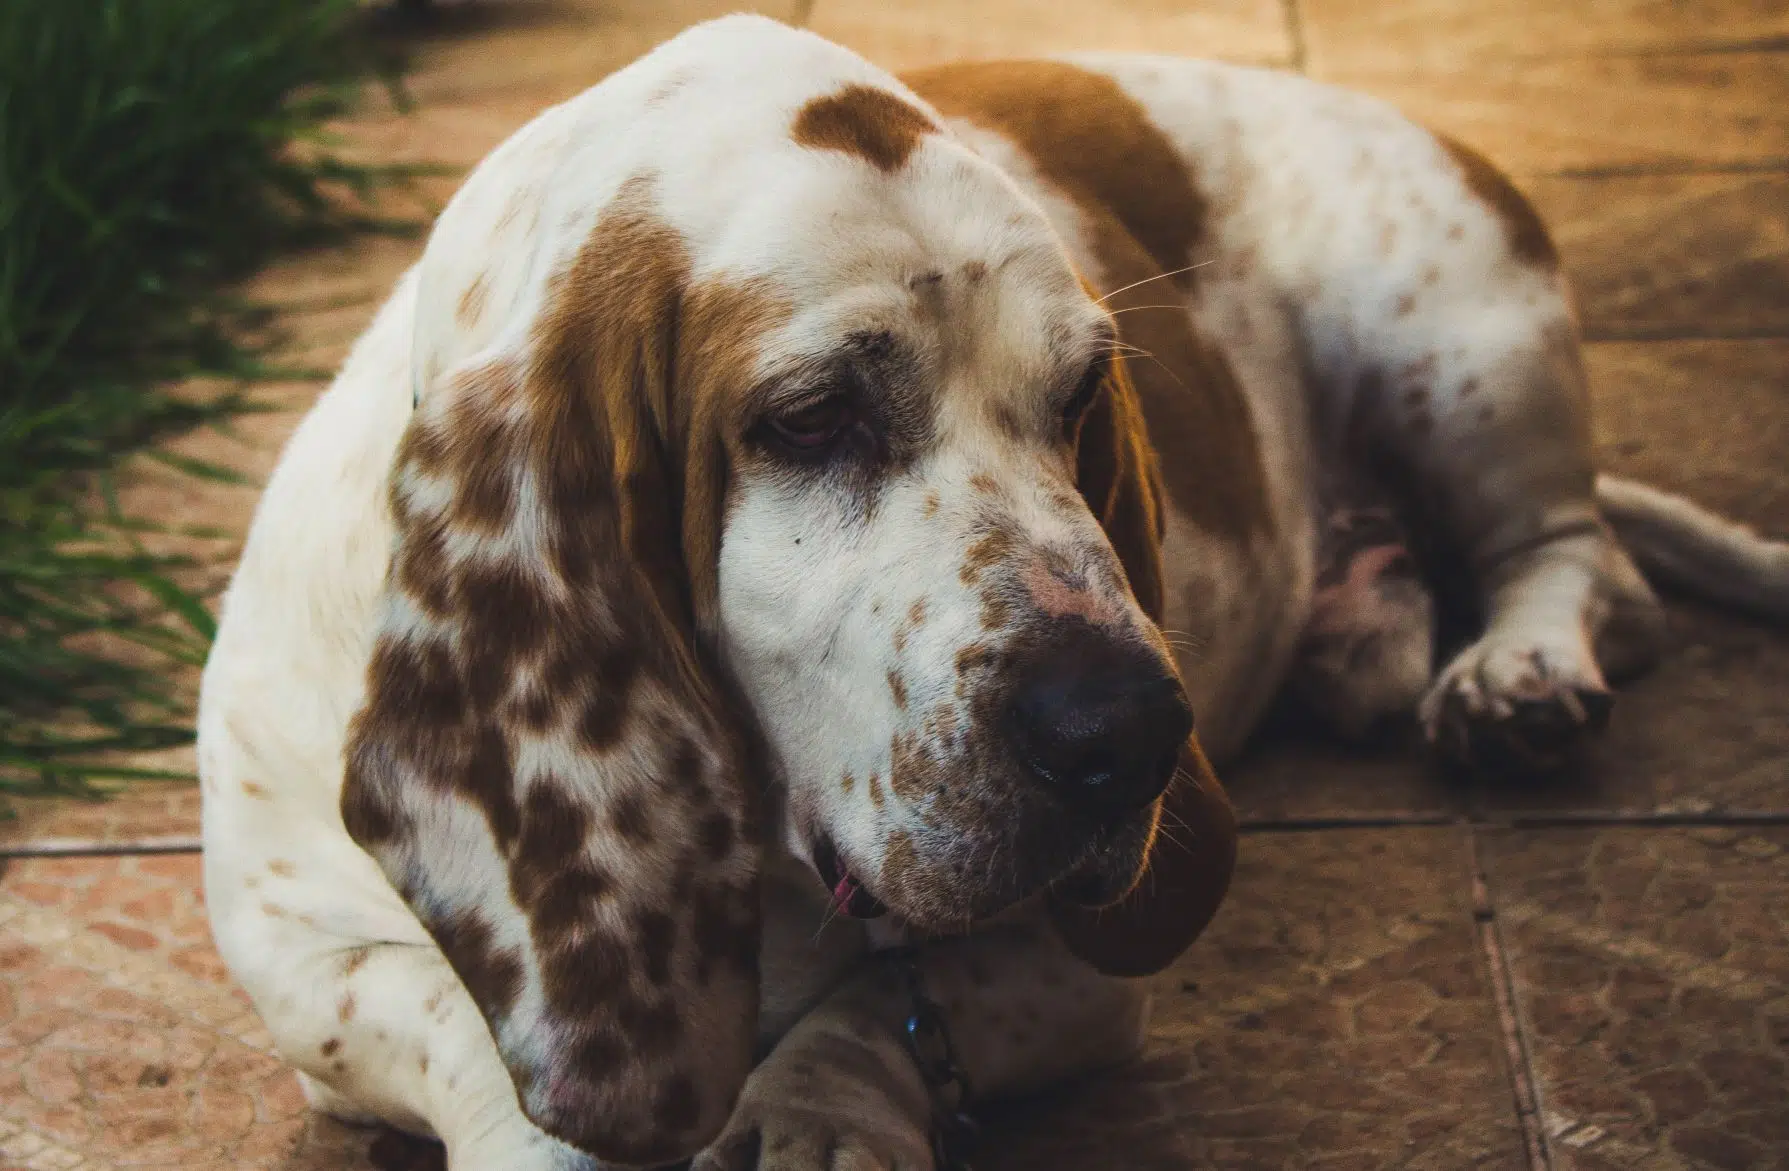 A brown and white Basset Hound lying on orange tiles wonders when it will have Basset Hound puppies